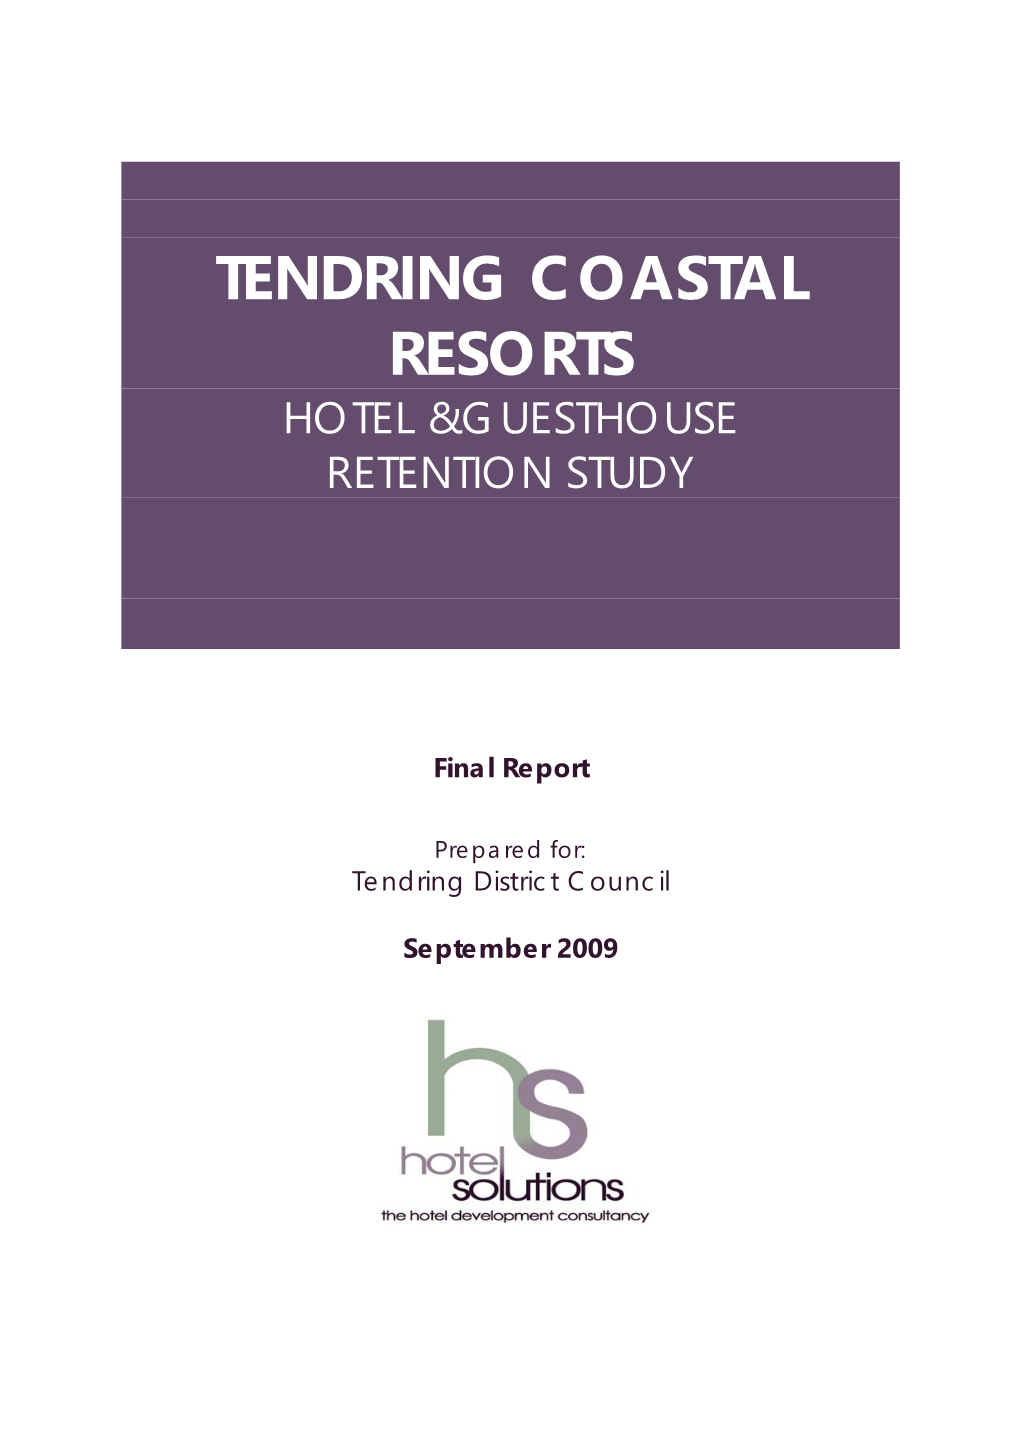 Hotel &Guesthouse Retention Study